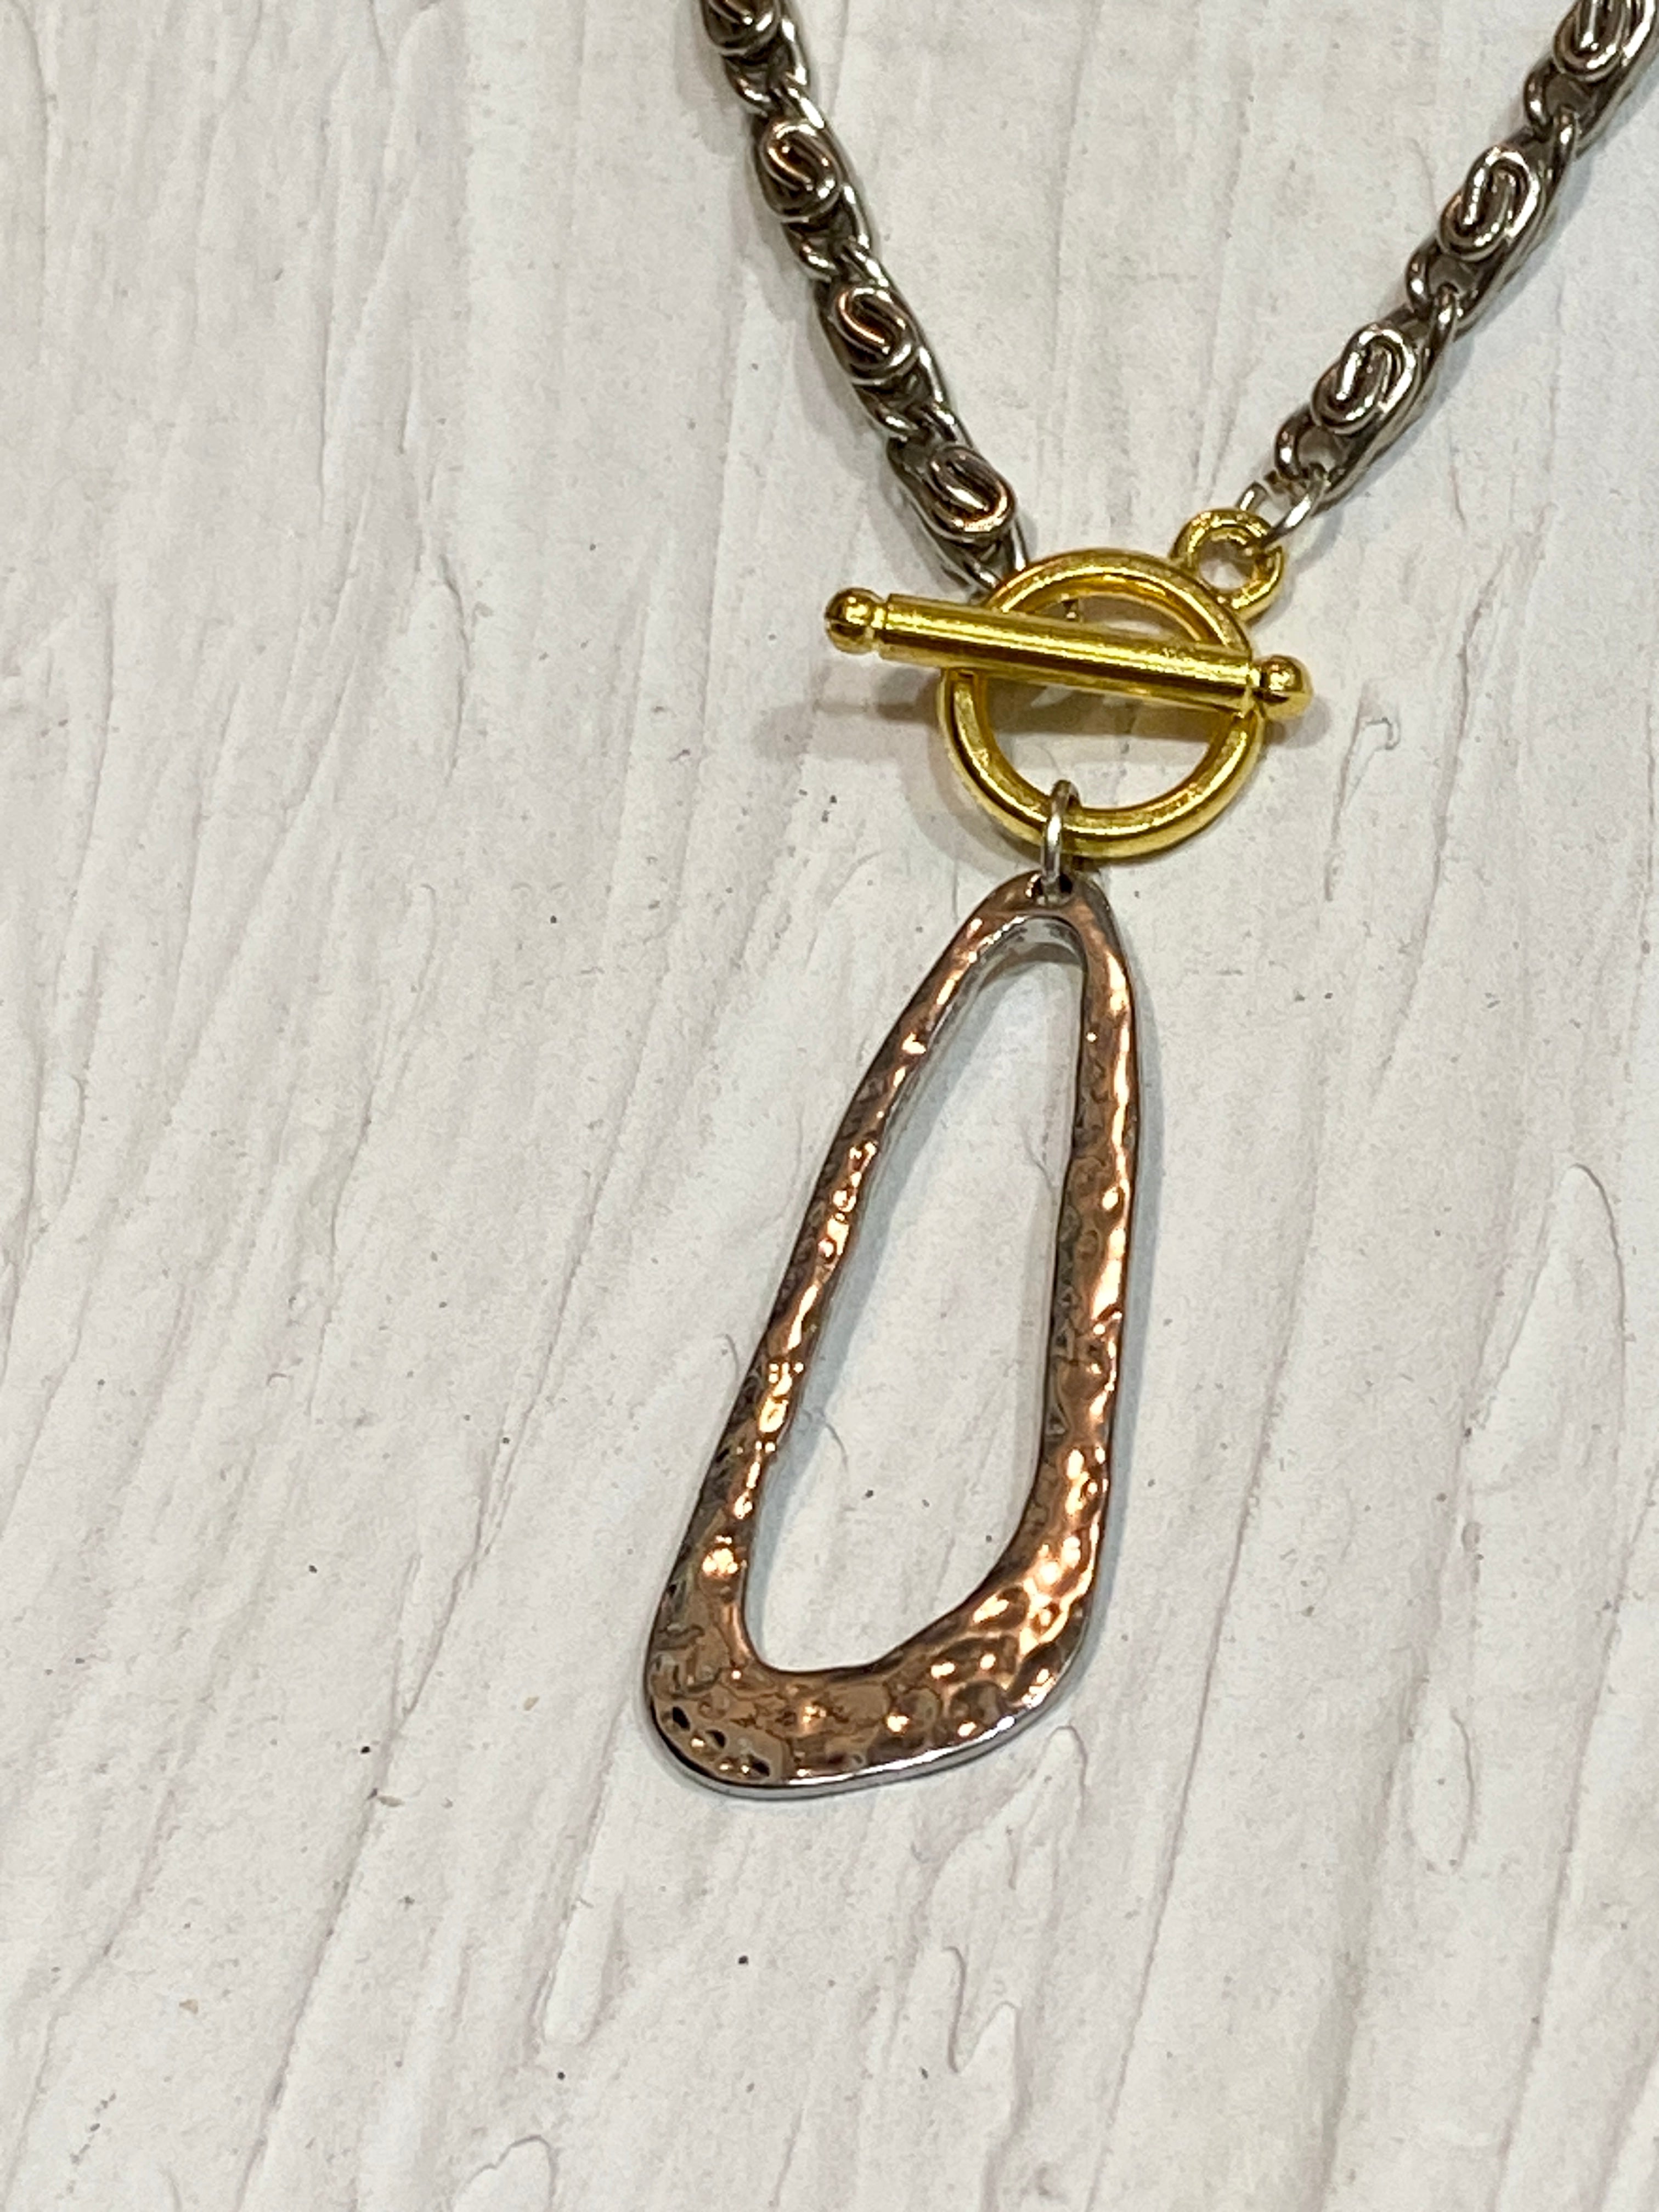 Gold and silver necklace tone